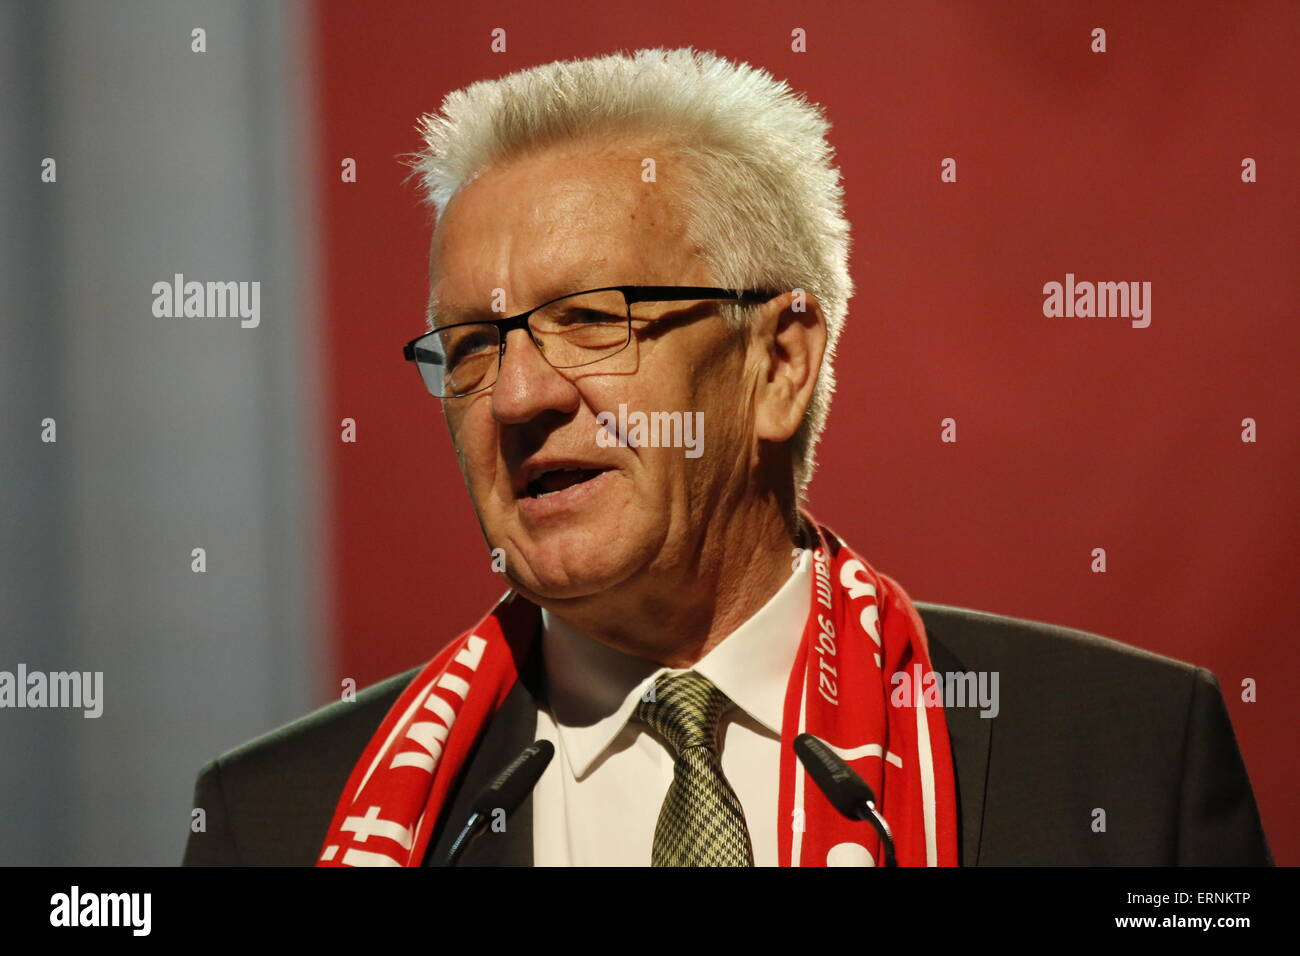 Stuttgart, Germany. 05th June, 2015. Winfried Kretschmann, the Minister-President of Baden-Württemberg, gives a Bible study at the 35th German Protestant Church Congress. The third day of the 35th Protestant Church Congress started with bible studies and political discussions. Music and events for children played an important part as well. Credit:  Michael Debets/Pacific Press/Alamy Live News Stock Photo